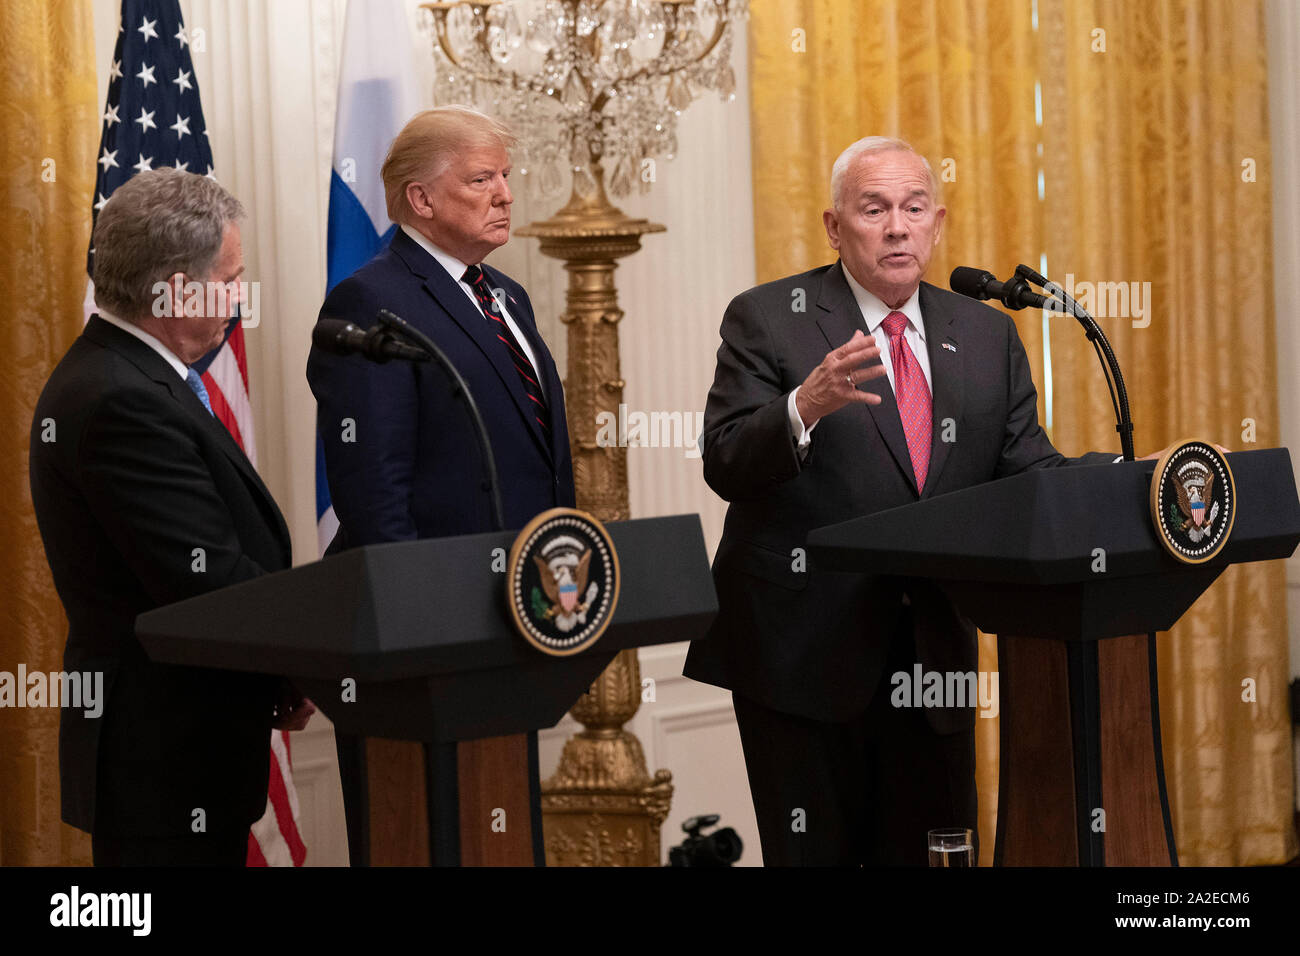 United States Ambassador to Finland Robert Frank Pence, right, makes a statement on the return of remains of Hopi Indians from Finland during a joint news conference with US President Donald J. Trump, center, and President Sauli Niinisto of Finland, left, at the White House in Washington, DC on Wednesday, October 2, 2019.Credit: Chris Kleponis/Pool via CNP/MediaPunch Stock Photo